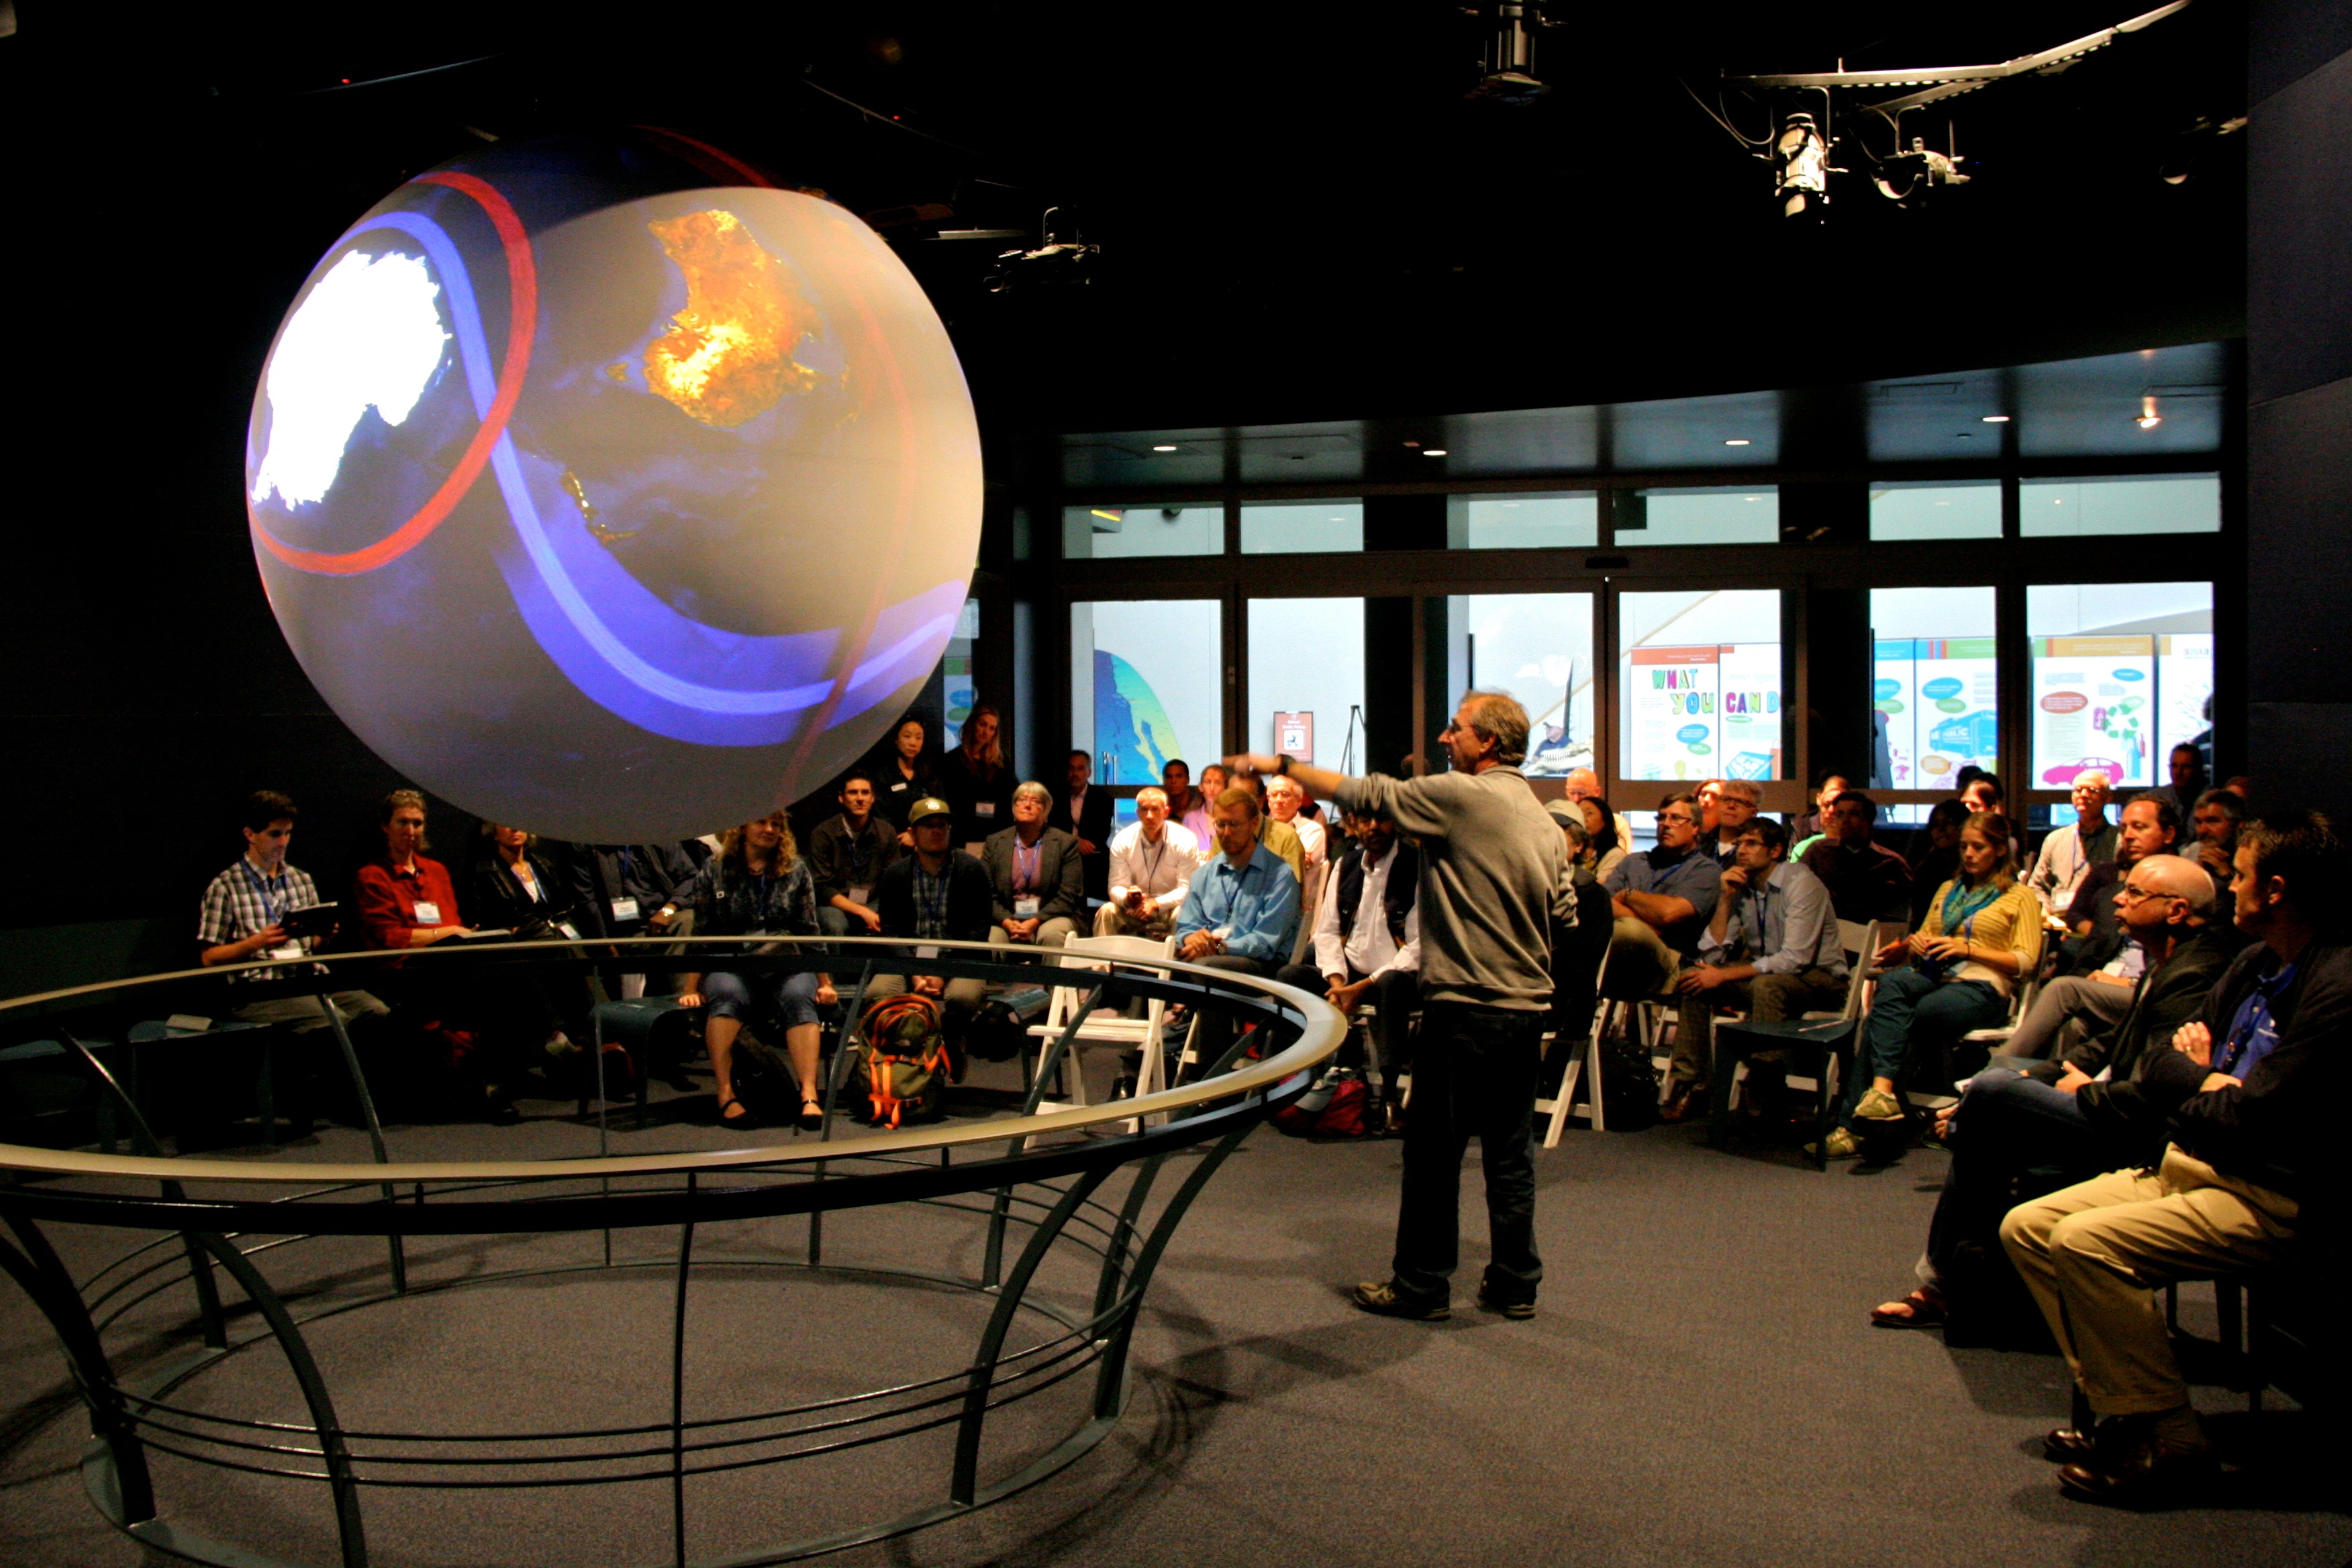 A presenter speaking to a group of people, gestoring towards a 6 foot sphere explaining earth science data.